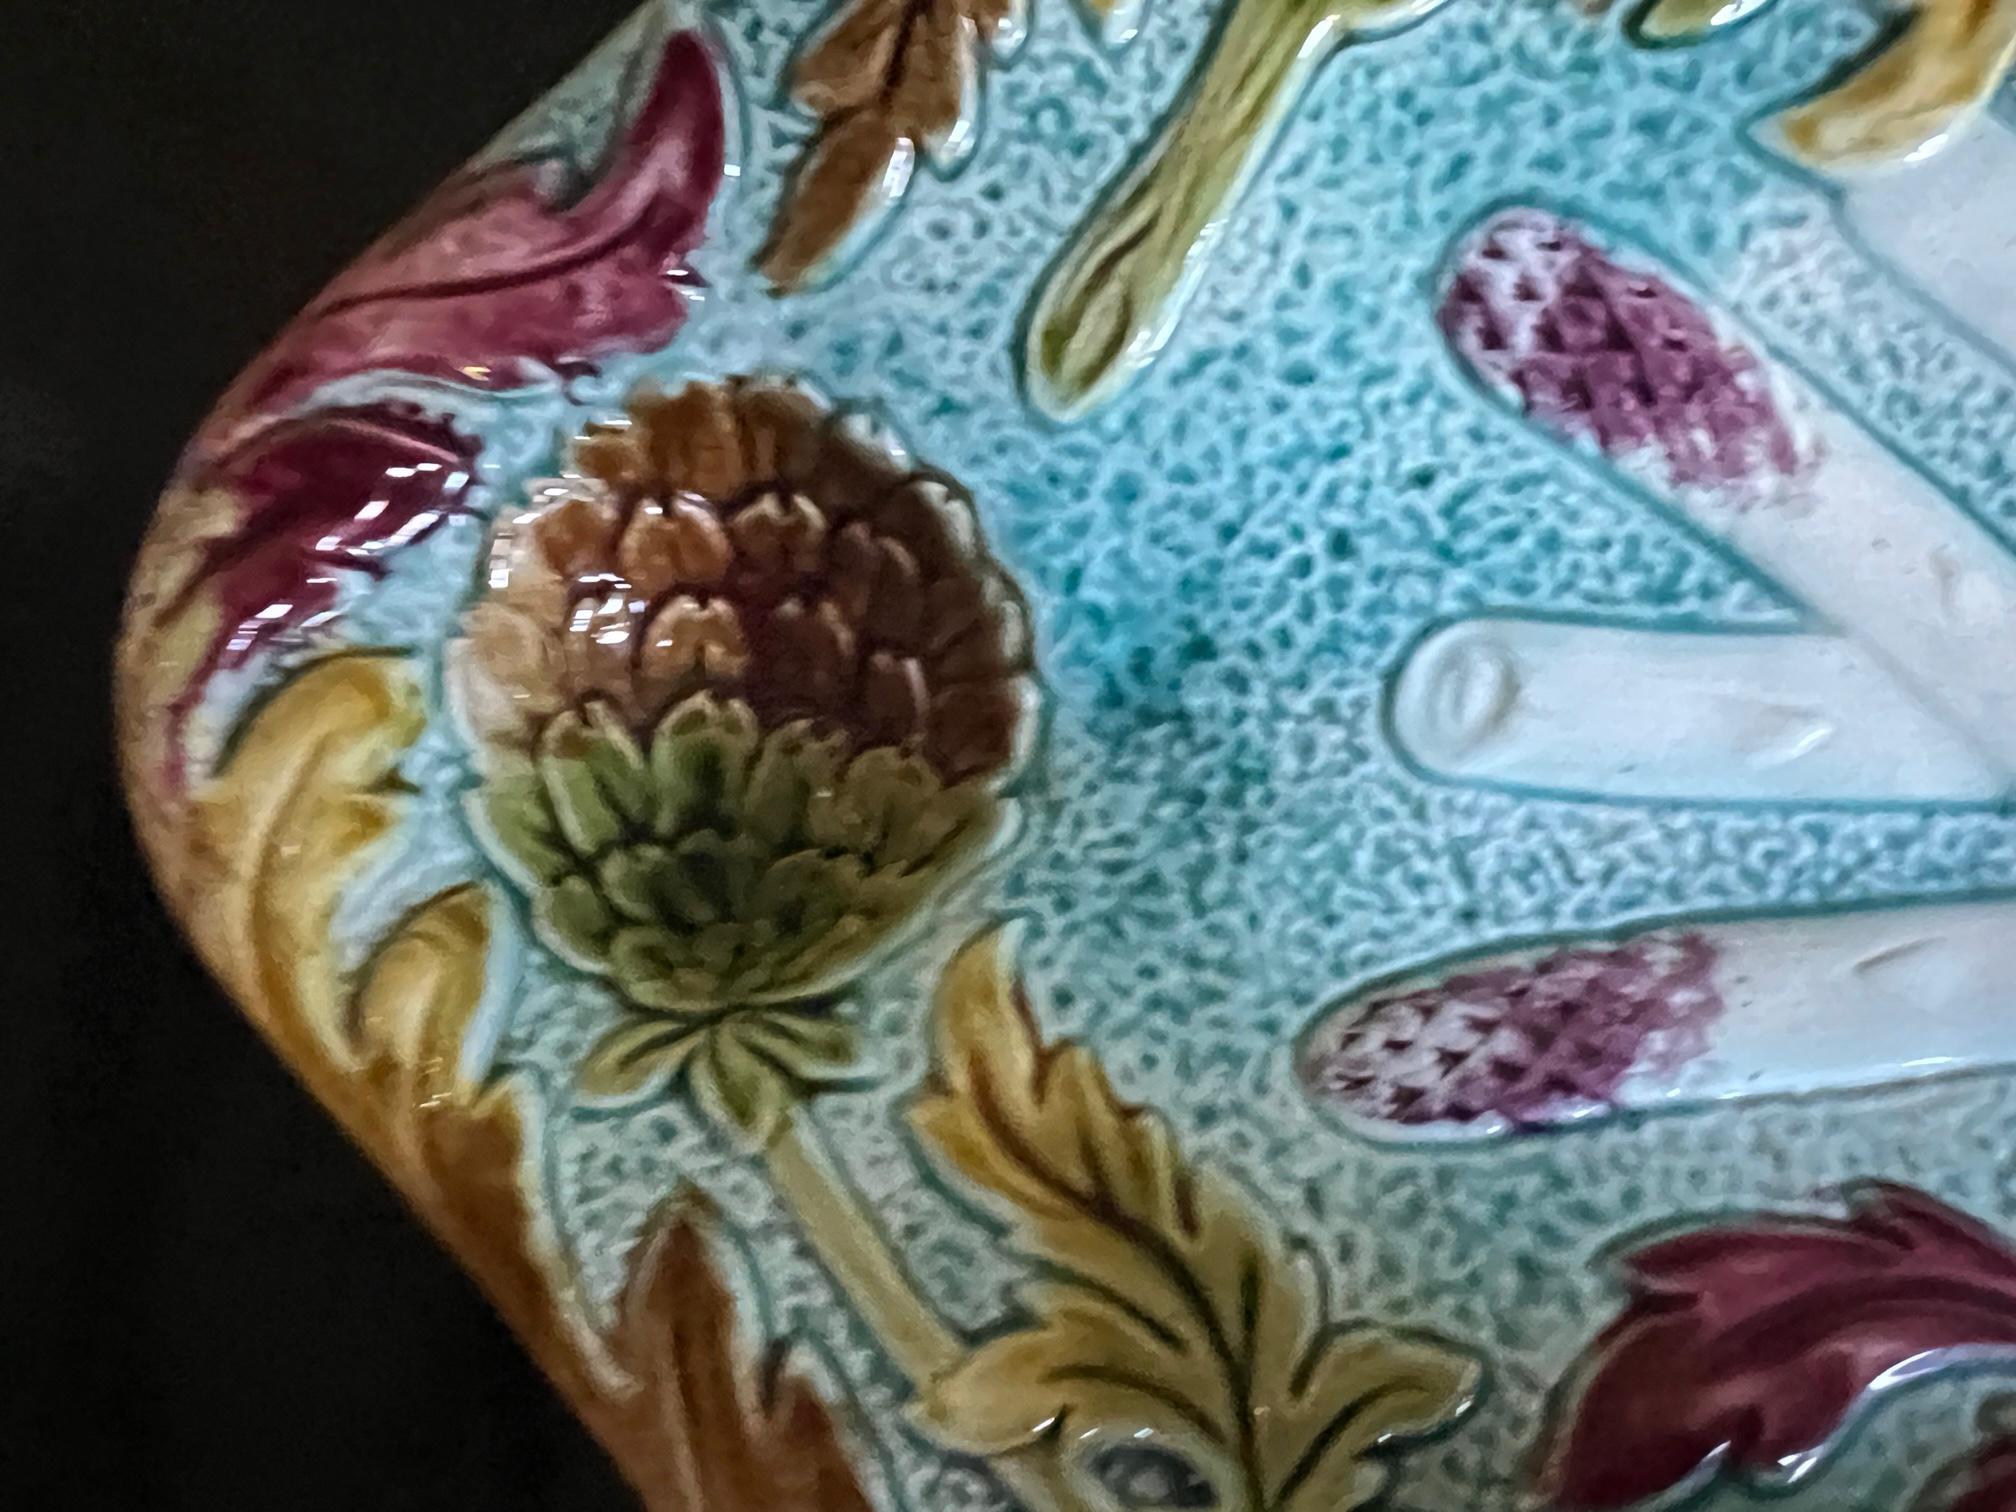 Vibrantly colored French majolica asparagus and artichoke platter made in the Orchies factory in the late 1800's. The tray has a scalloped rim , a turquoise background with artichoke flowers and fall colored leaves. The depressed sauce wells on each